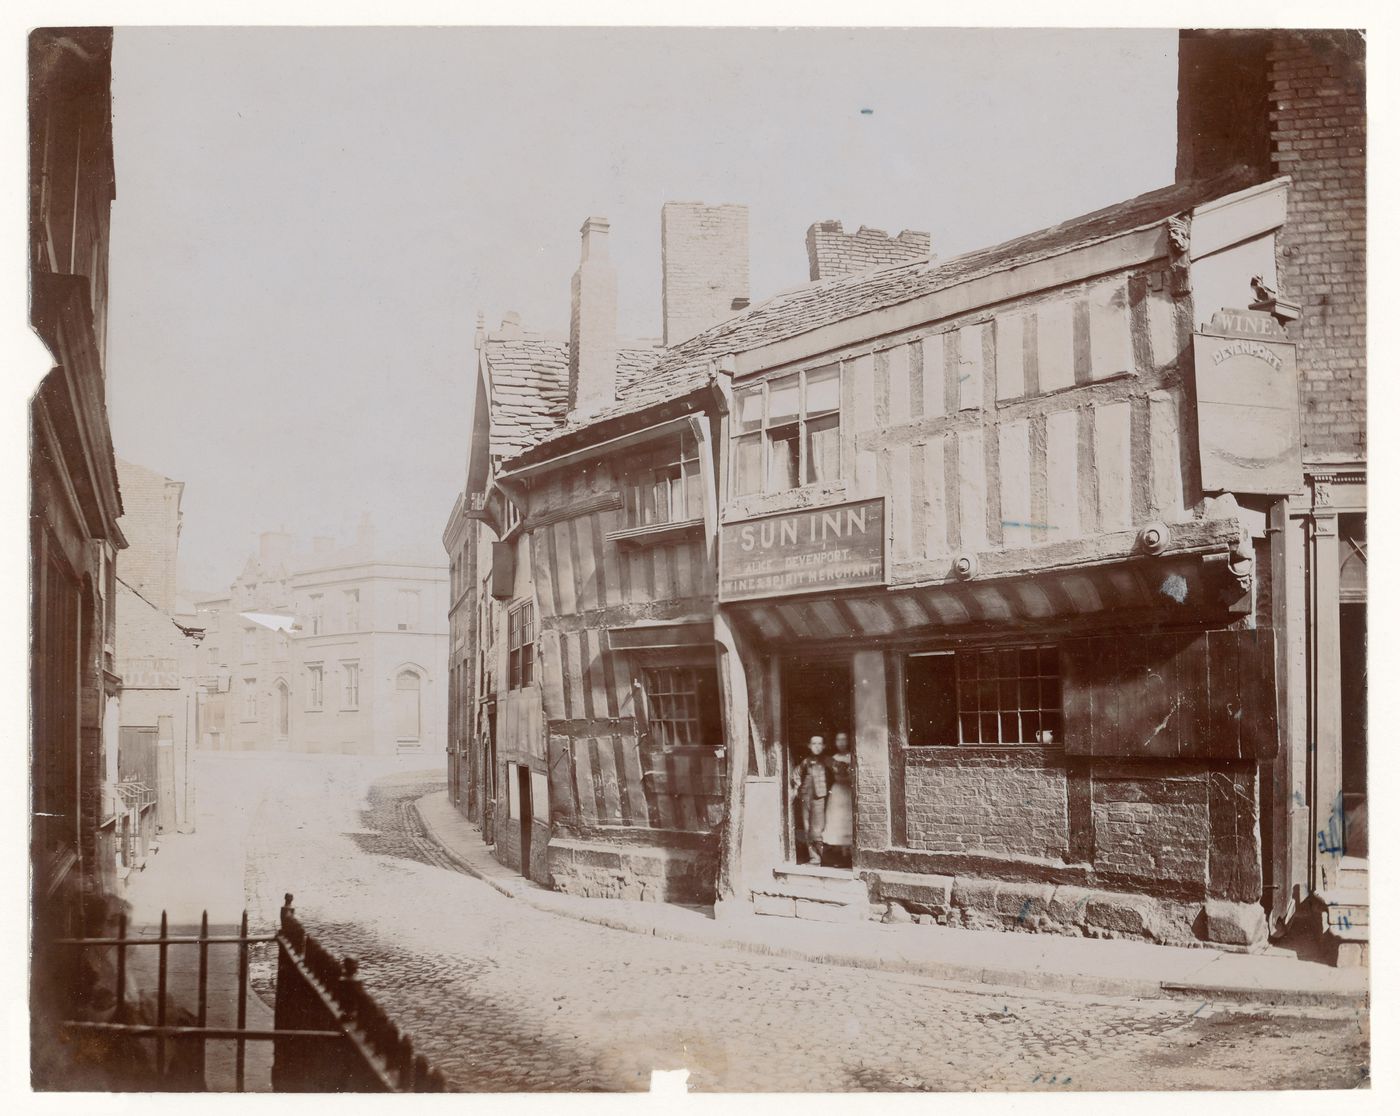 View of houses in Long Millgate, including Sun Inn., Manchester, England